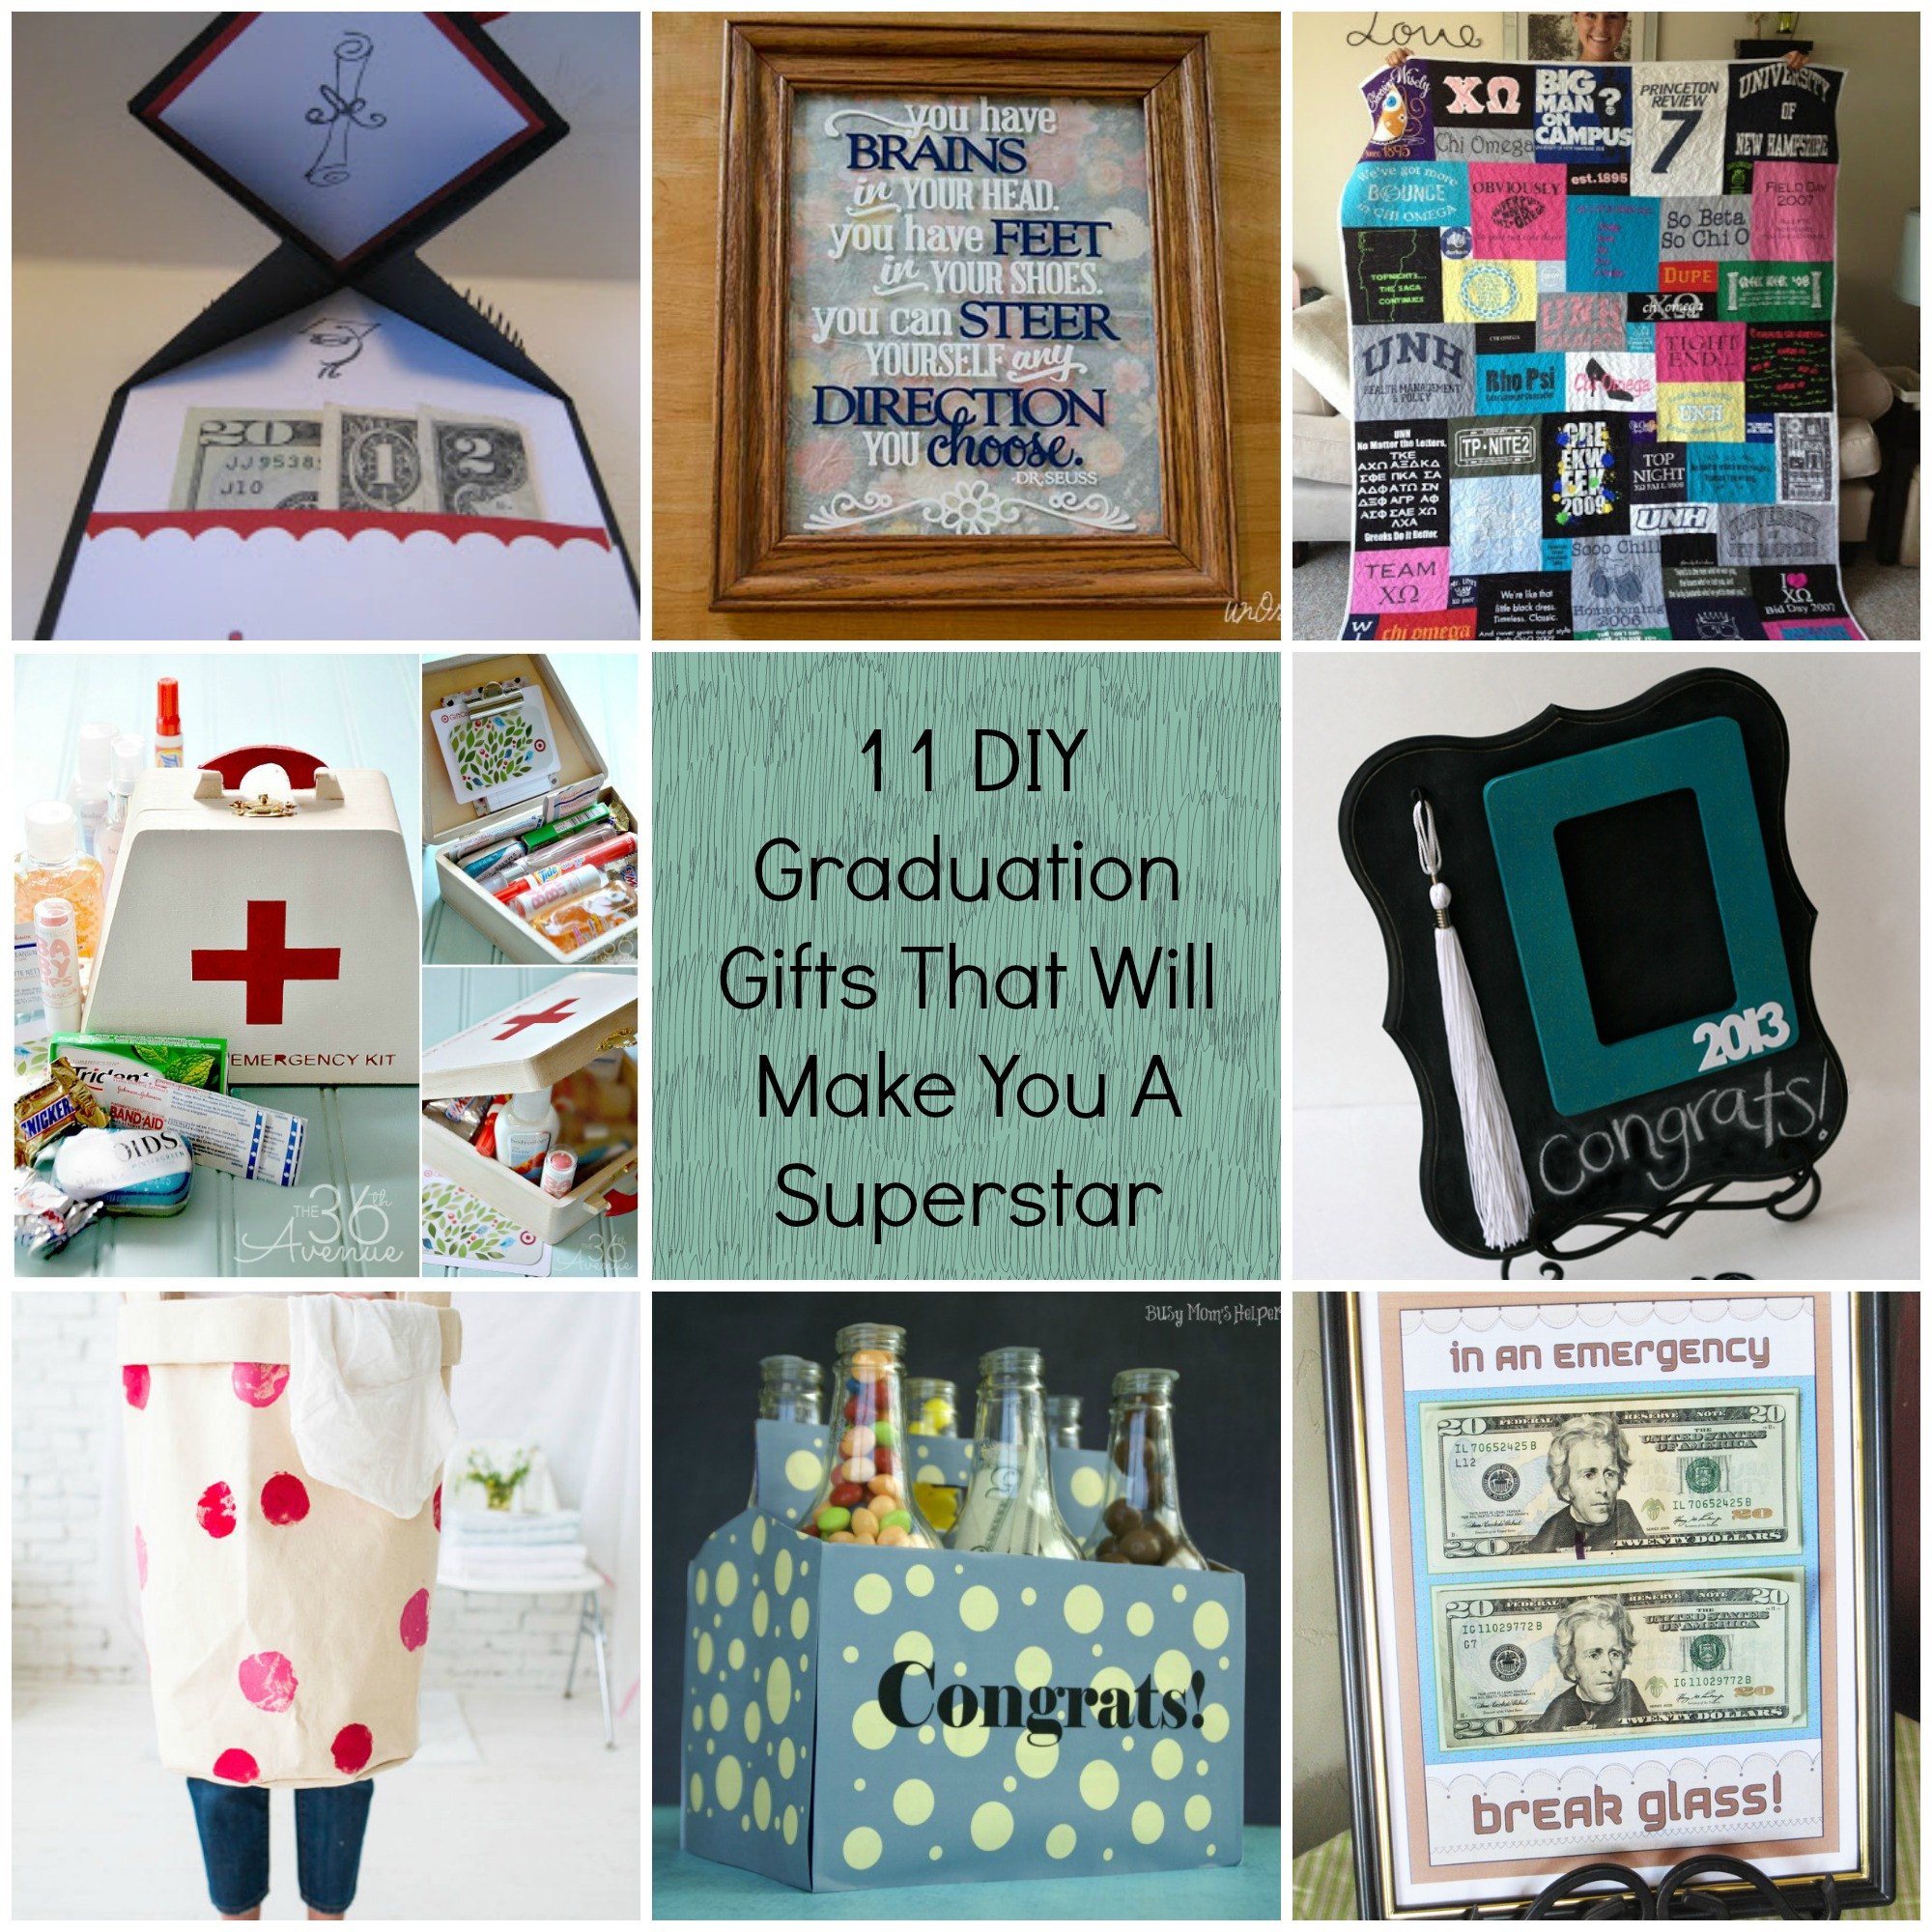 Ideas For Graduation Gift
 11 DIY Graduation Gifts That Will Make You A Superstar